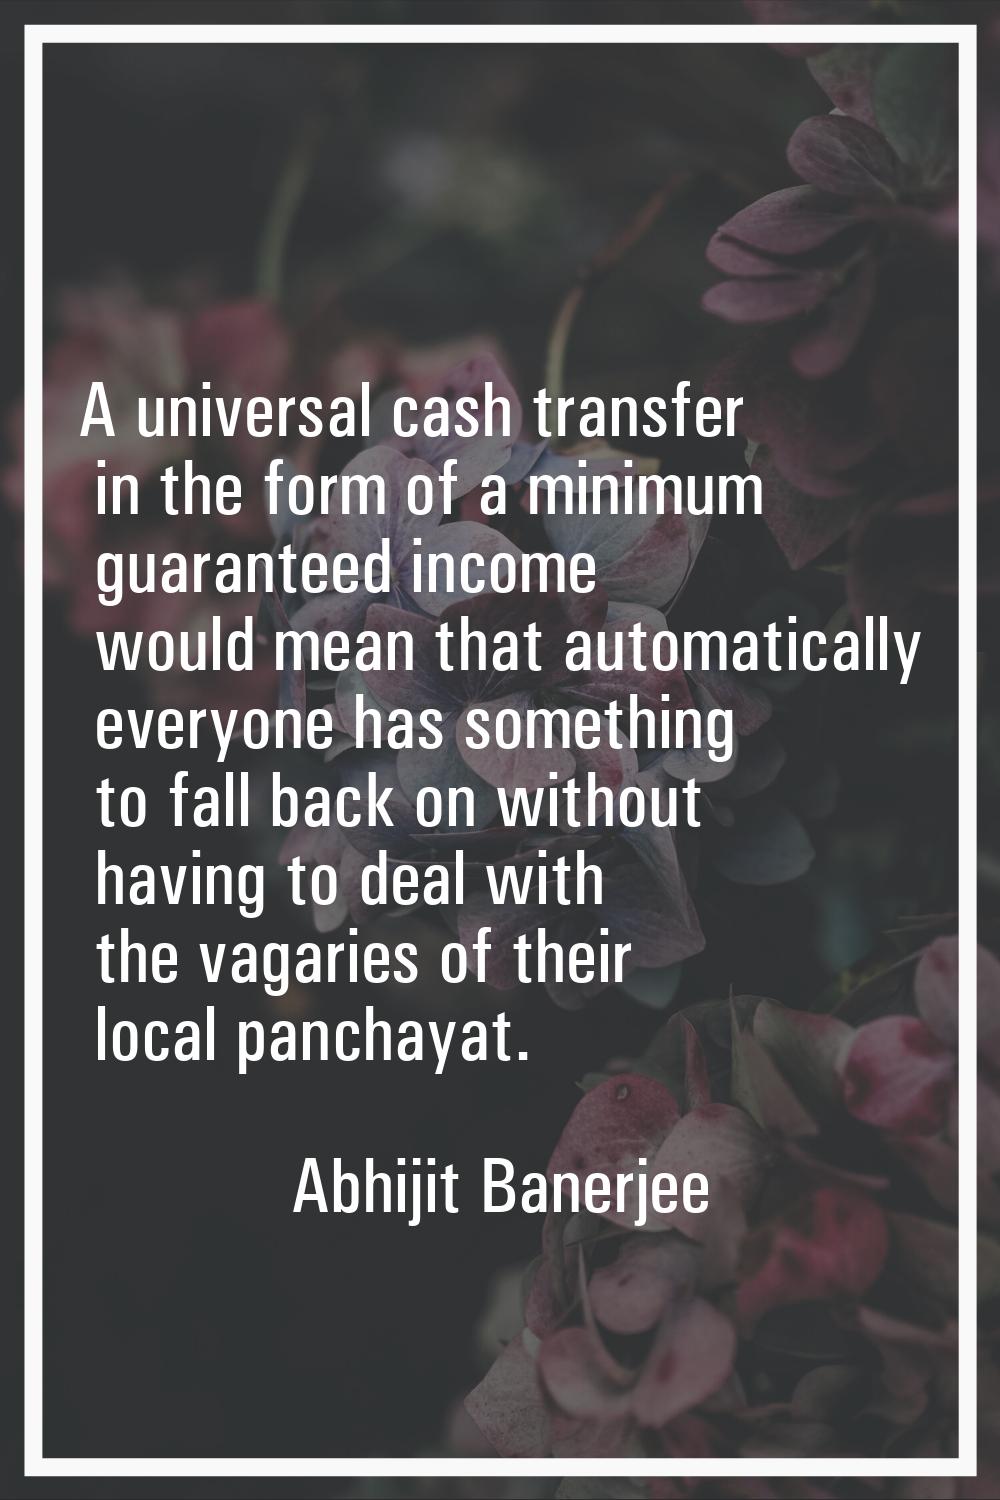 A universal cash transfer in the form of a minimum guaranteed income would mean that automatically 